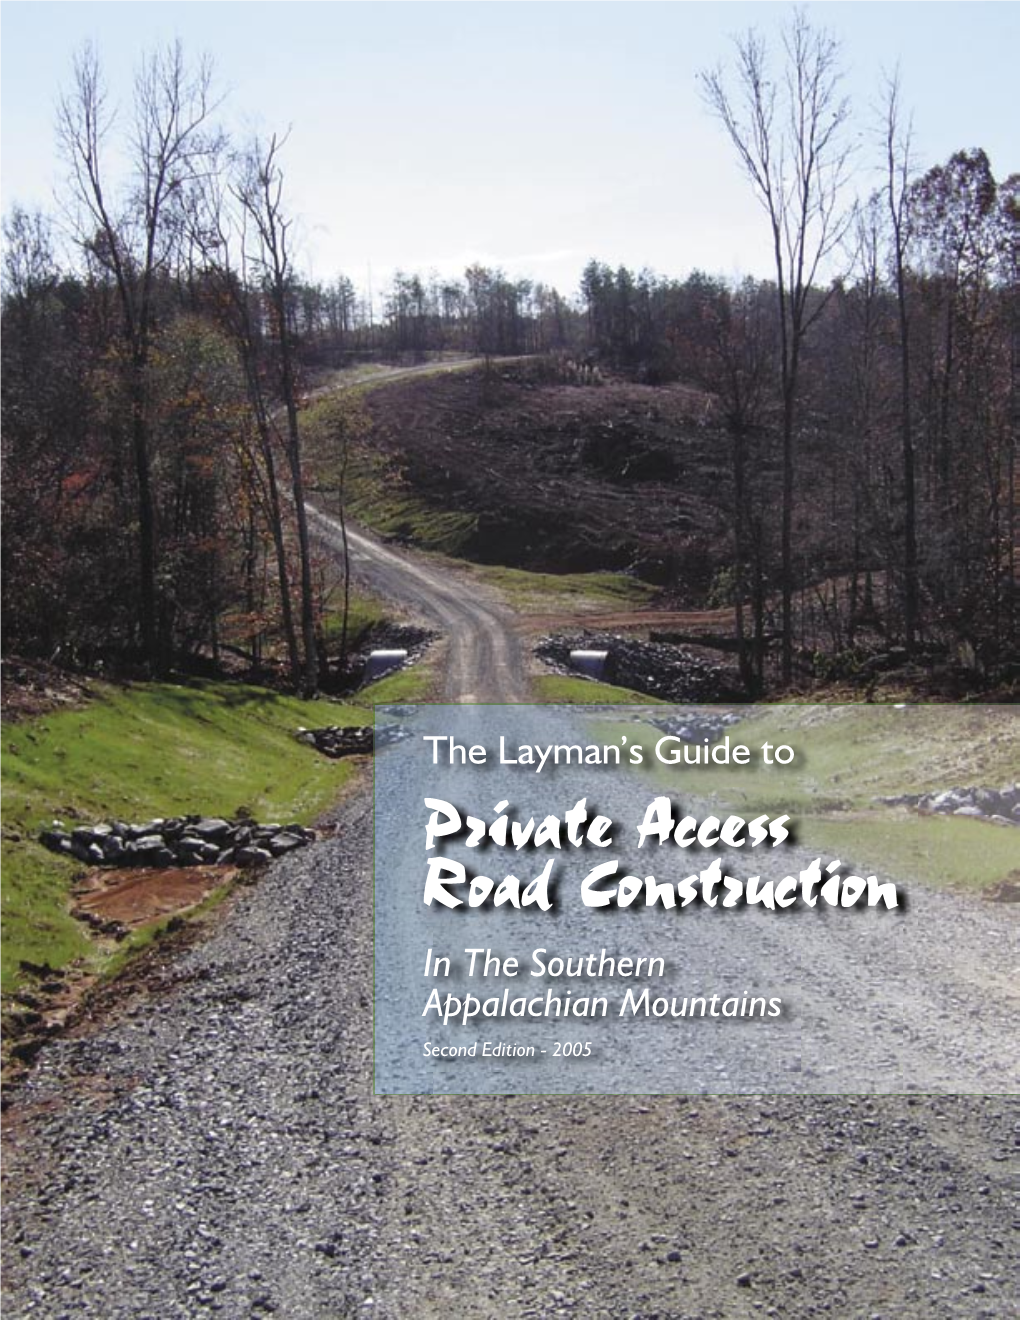 The Layman's Guide to Private Access Road Construction